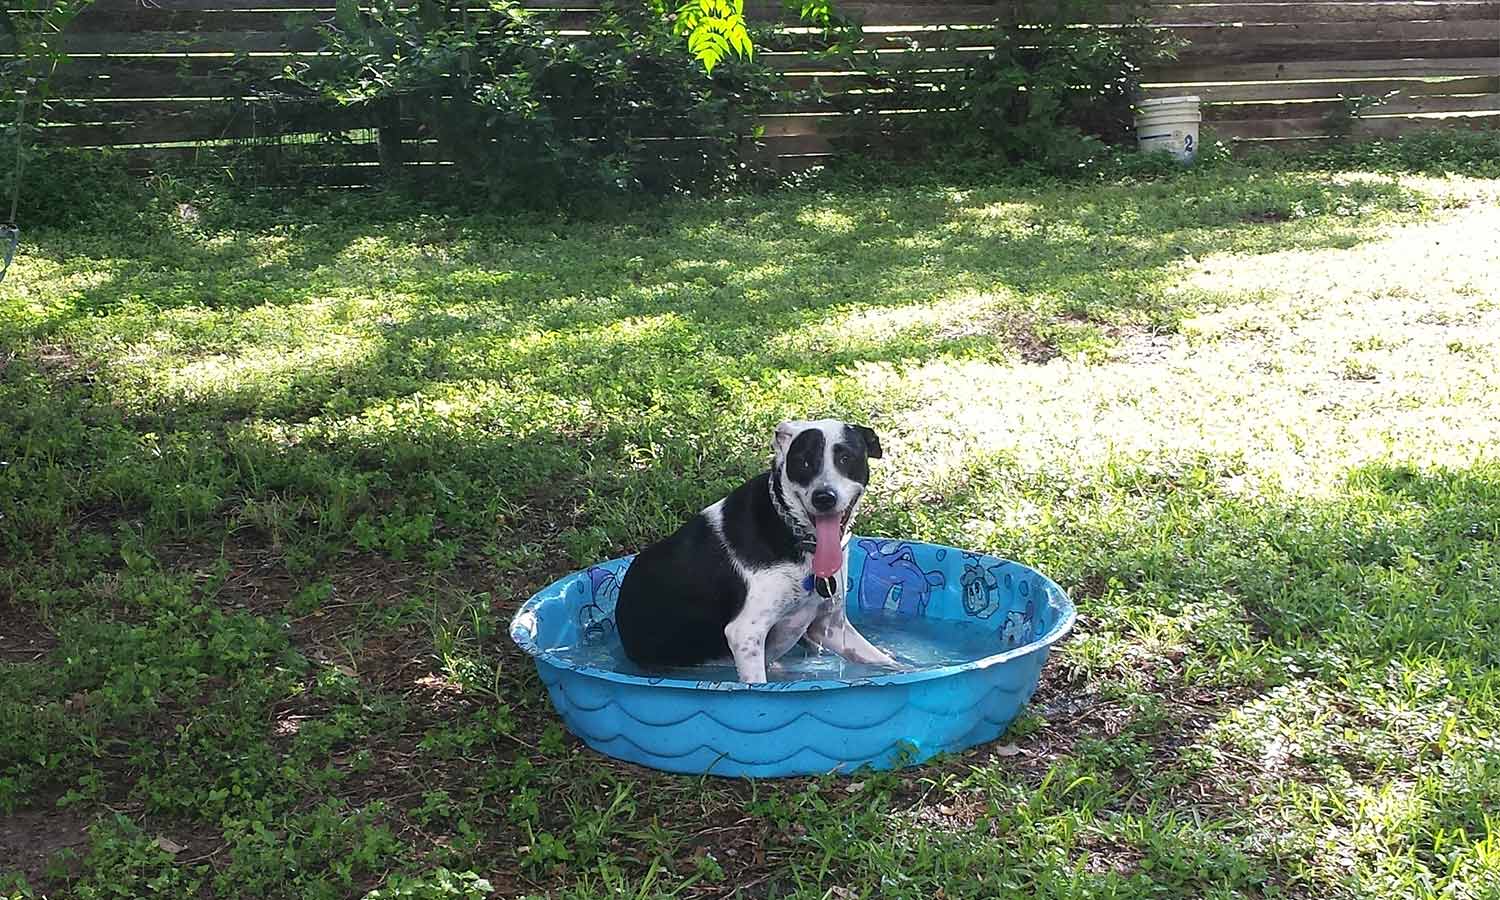 Shiner’s relaxing, hanging out in the pool! Bianca in Live Oak, TX sent a picture of Shiner, cooling off in the kiddie pool, after running around the backyard.